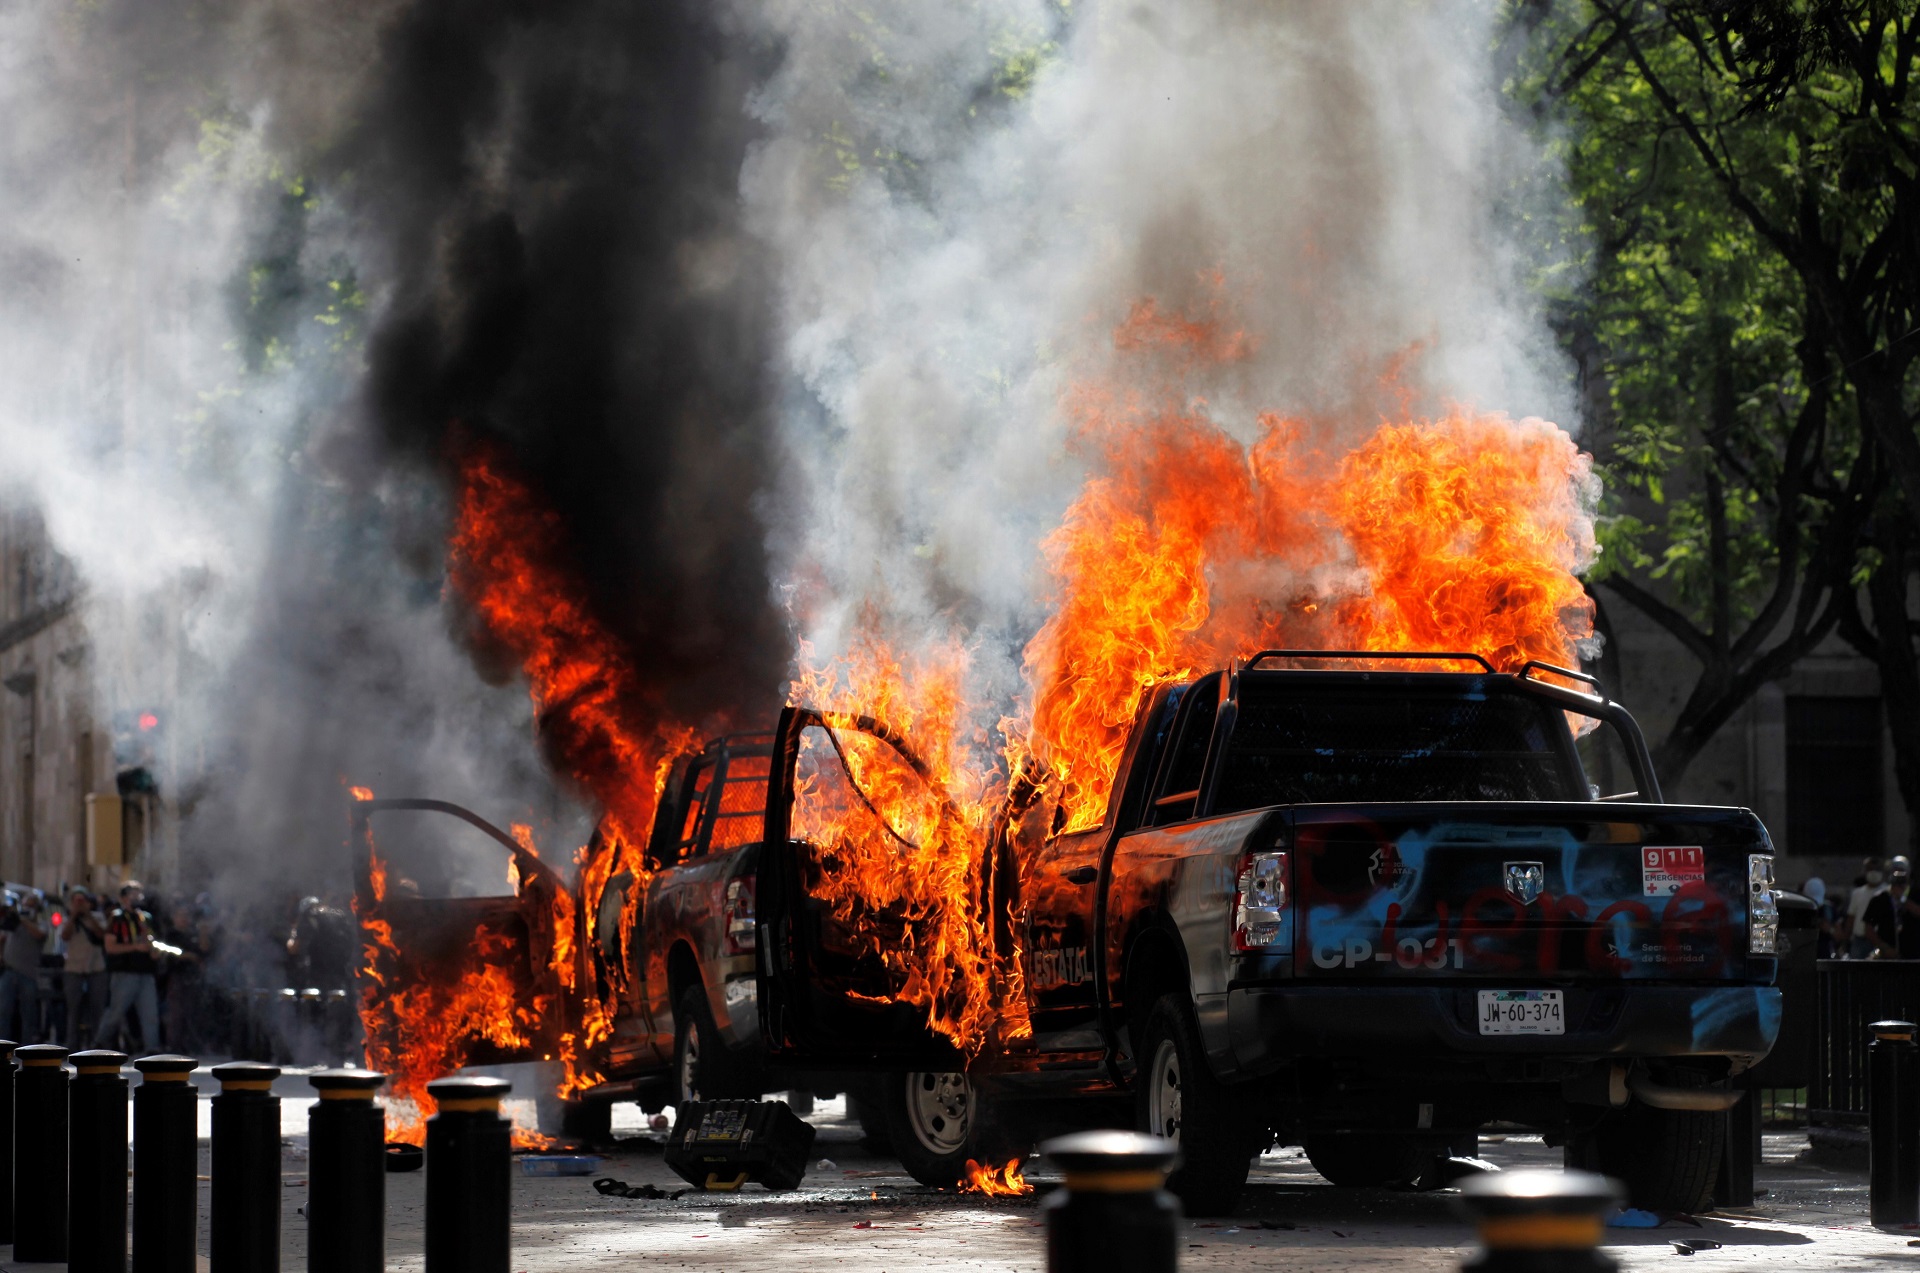 epa08466190 Two police cars burn after they were set on fire during a protest following the death of Giovanni Lopez, who died early May while in police custody in Ixtlahuacan de los Membrillos, in the city of Guadalajara, Mexico 04 June 2020. According to media reports, at least 20 people were arrested and two patrol cars were set on fire. Lopez was reportedly arrested on 04 May 2020 for not wearing a mask amid the coronavirus pandemic.  EPA/FRANCISCO GUASCO